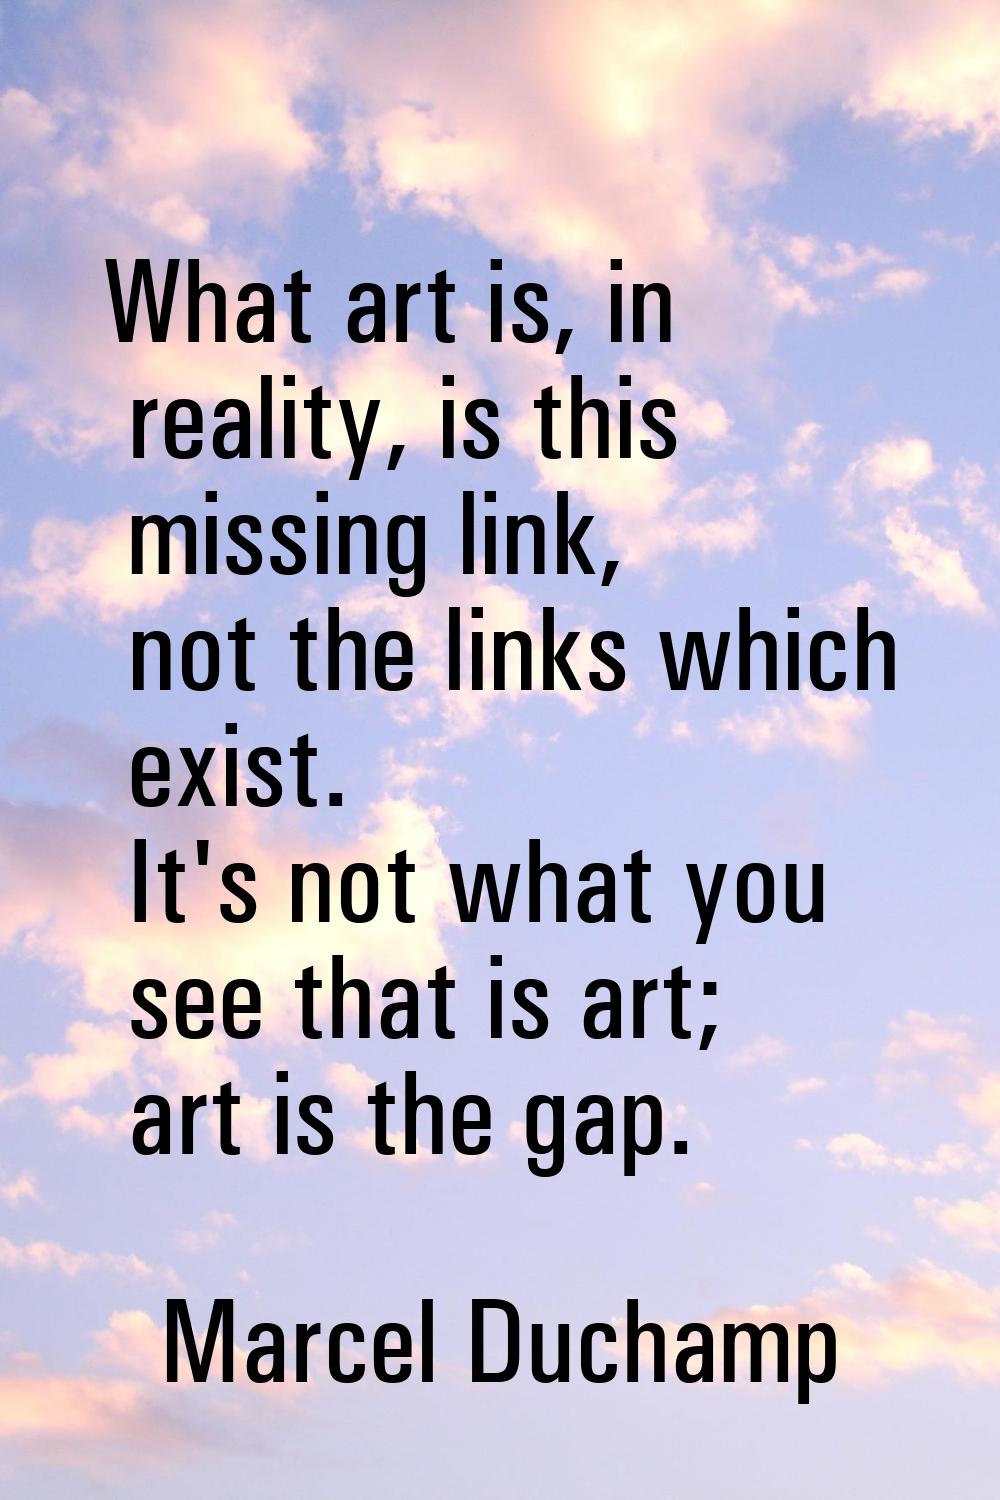 What art is, in reality, is this missing link, not the links which exist. It's not what you see tha